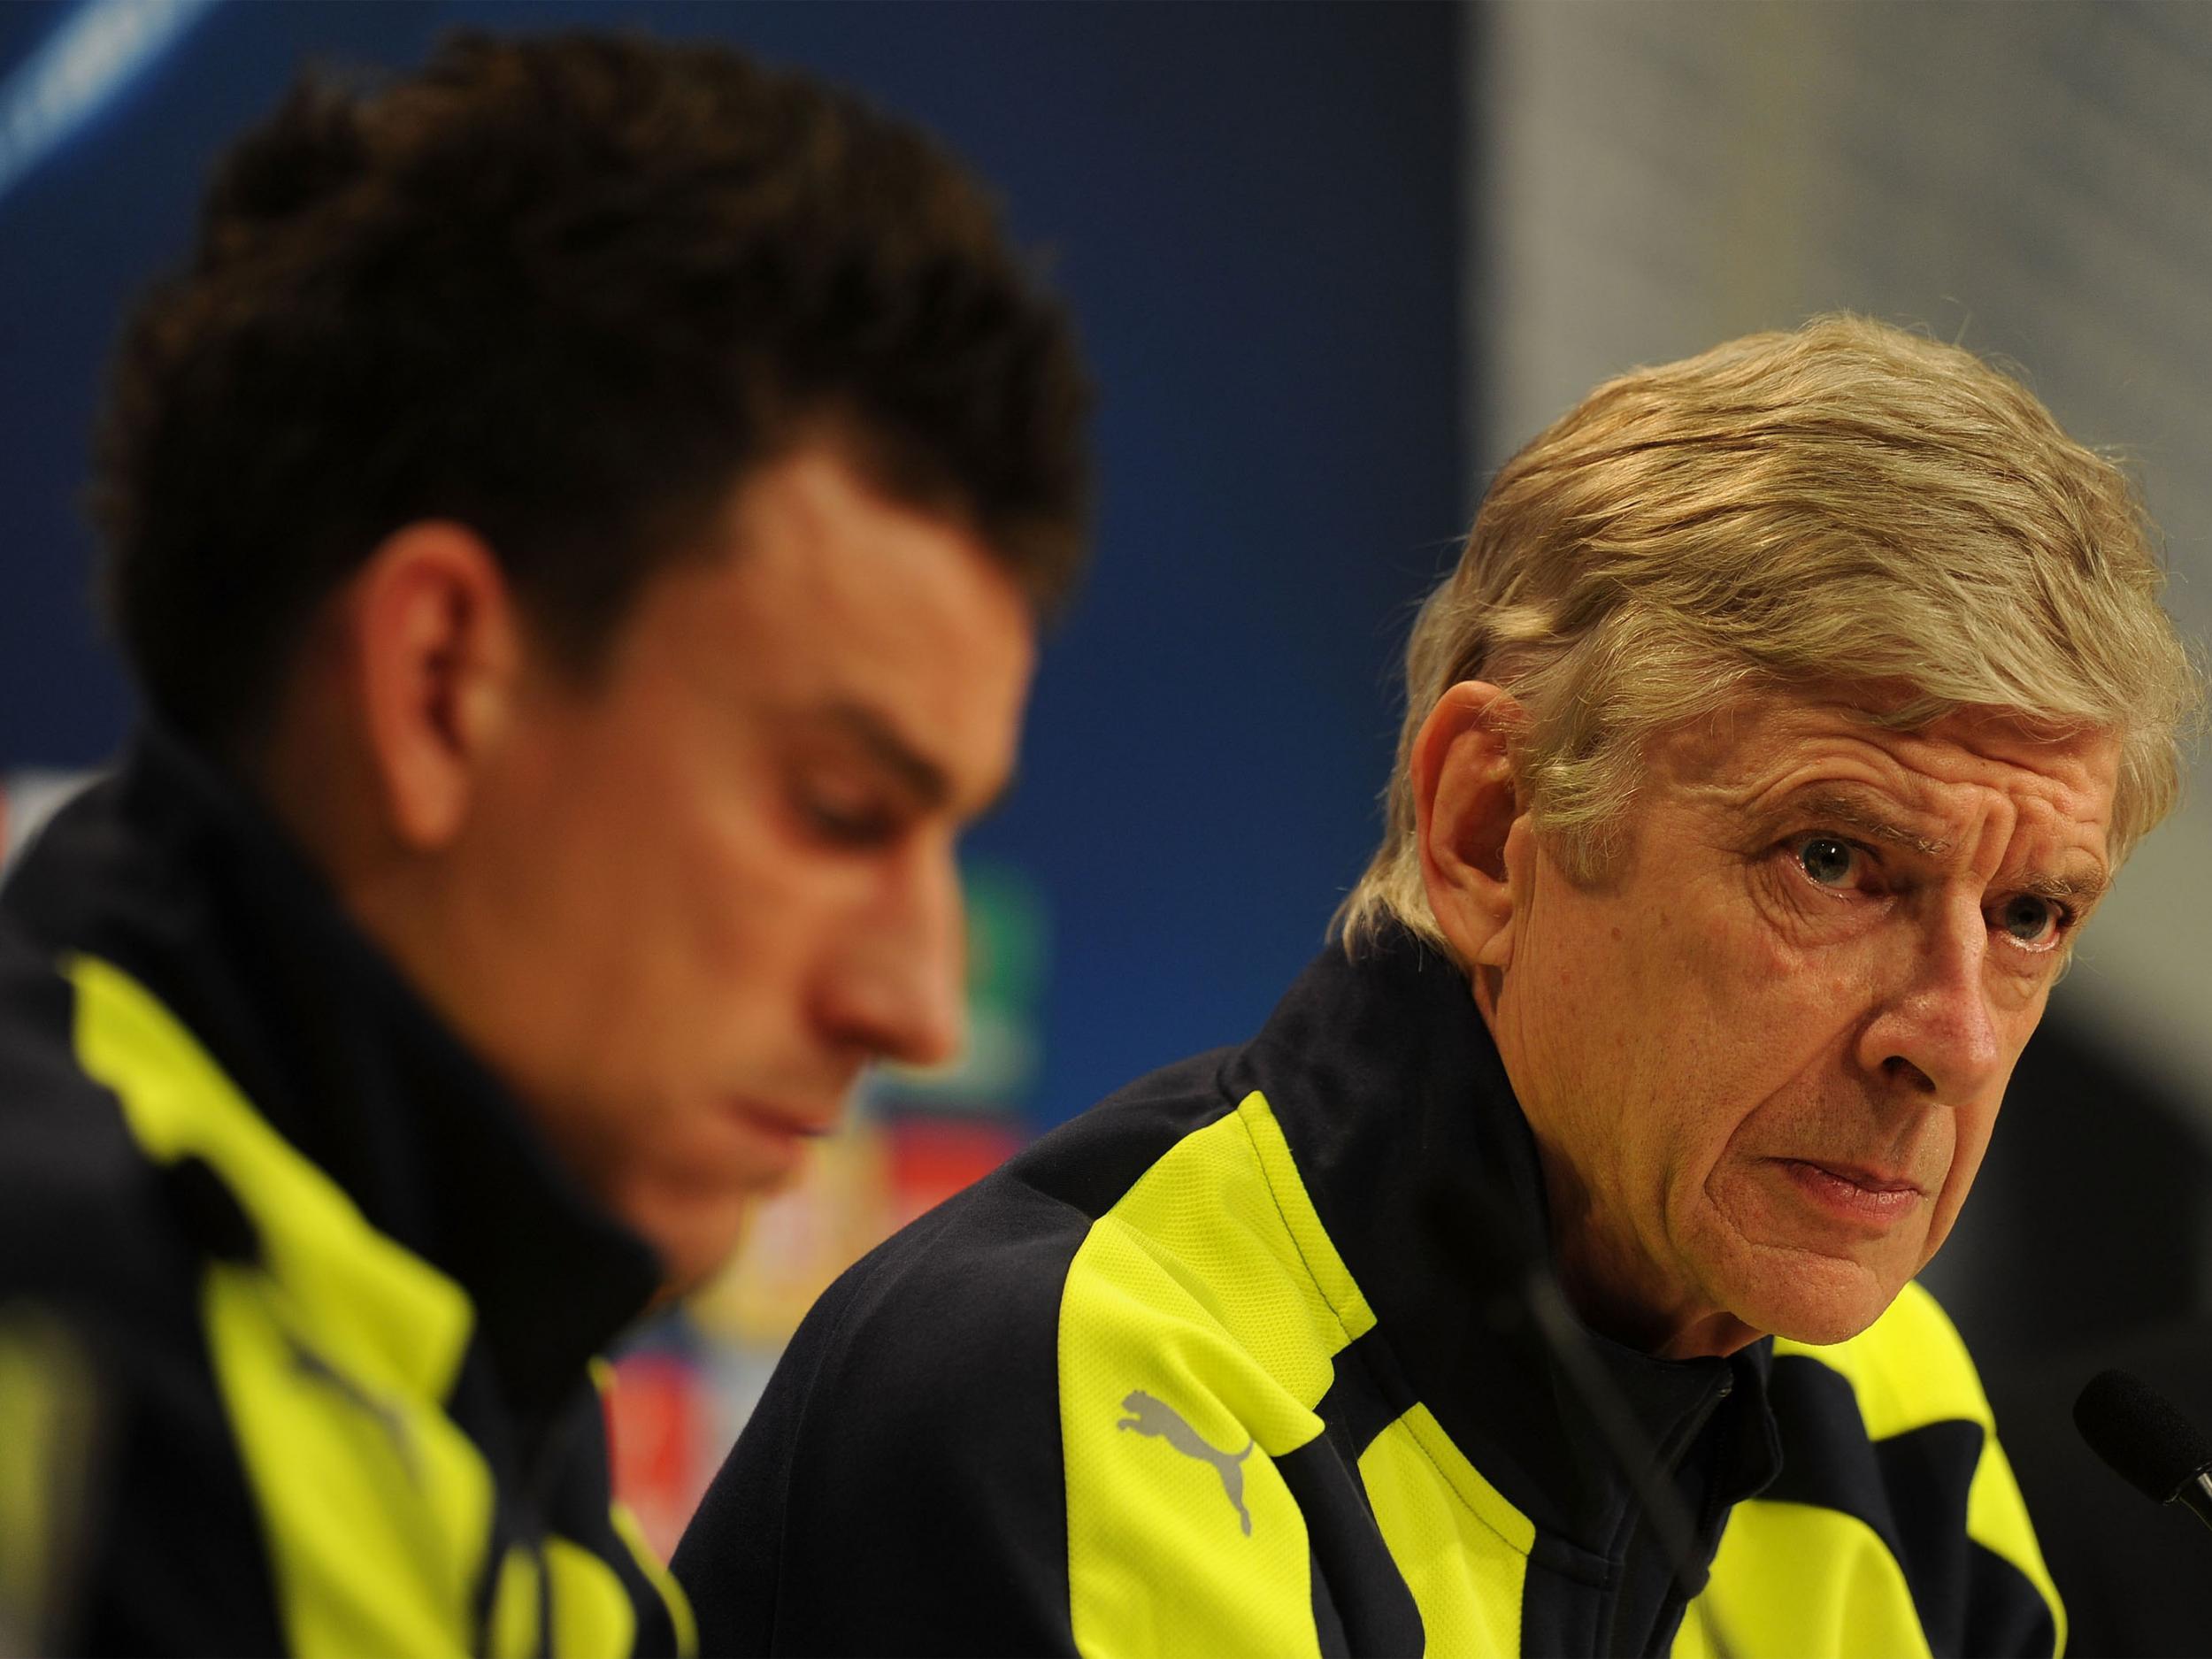 Wenger refused to be drawn on whether this was his 'lowest moment' as Arsenal manager